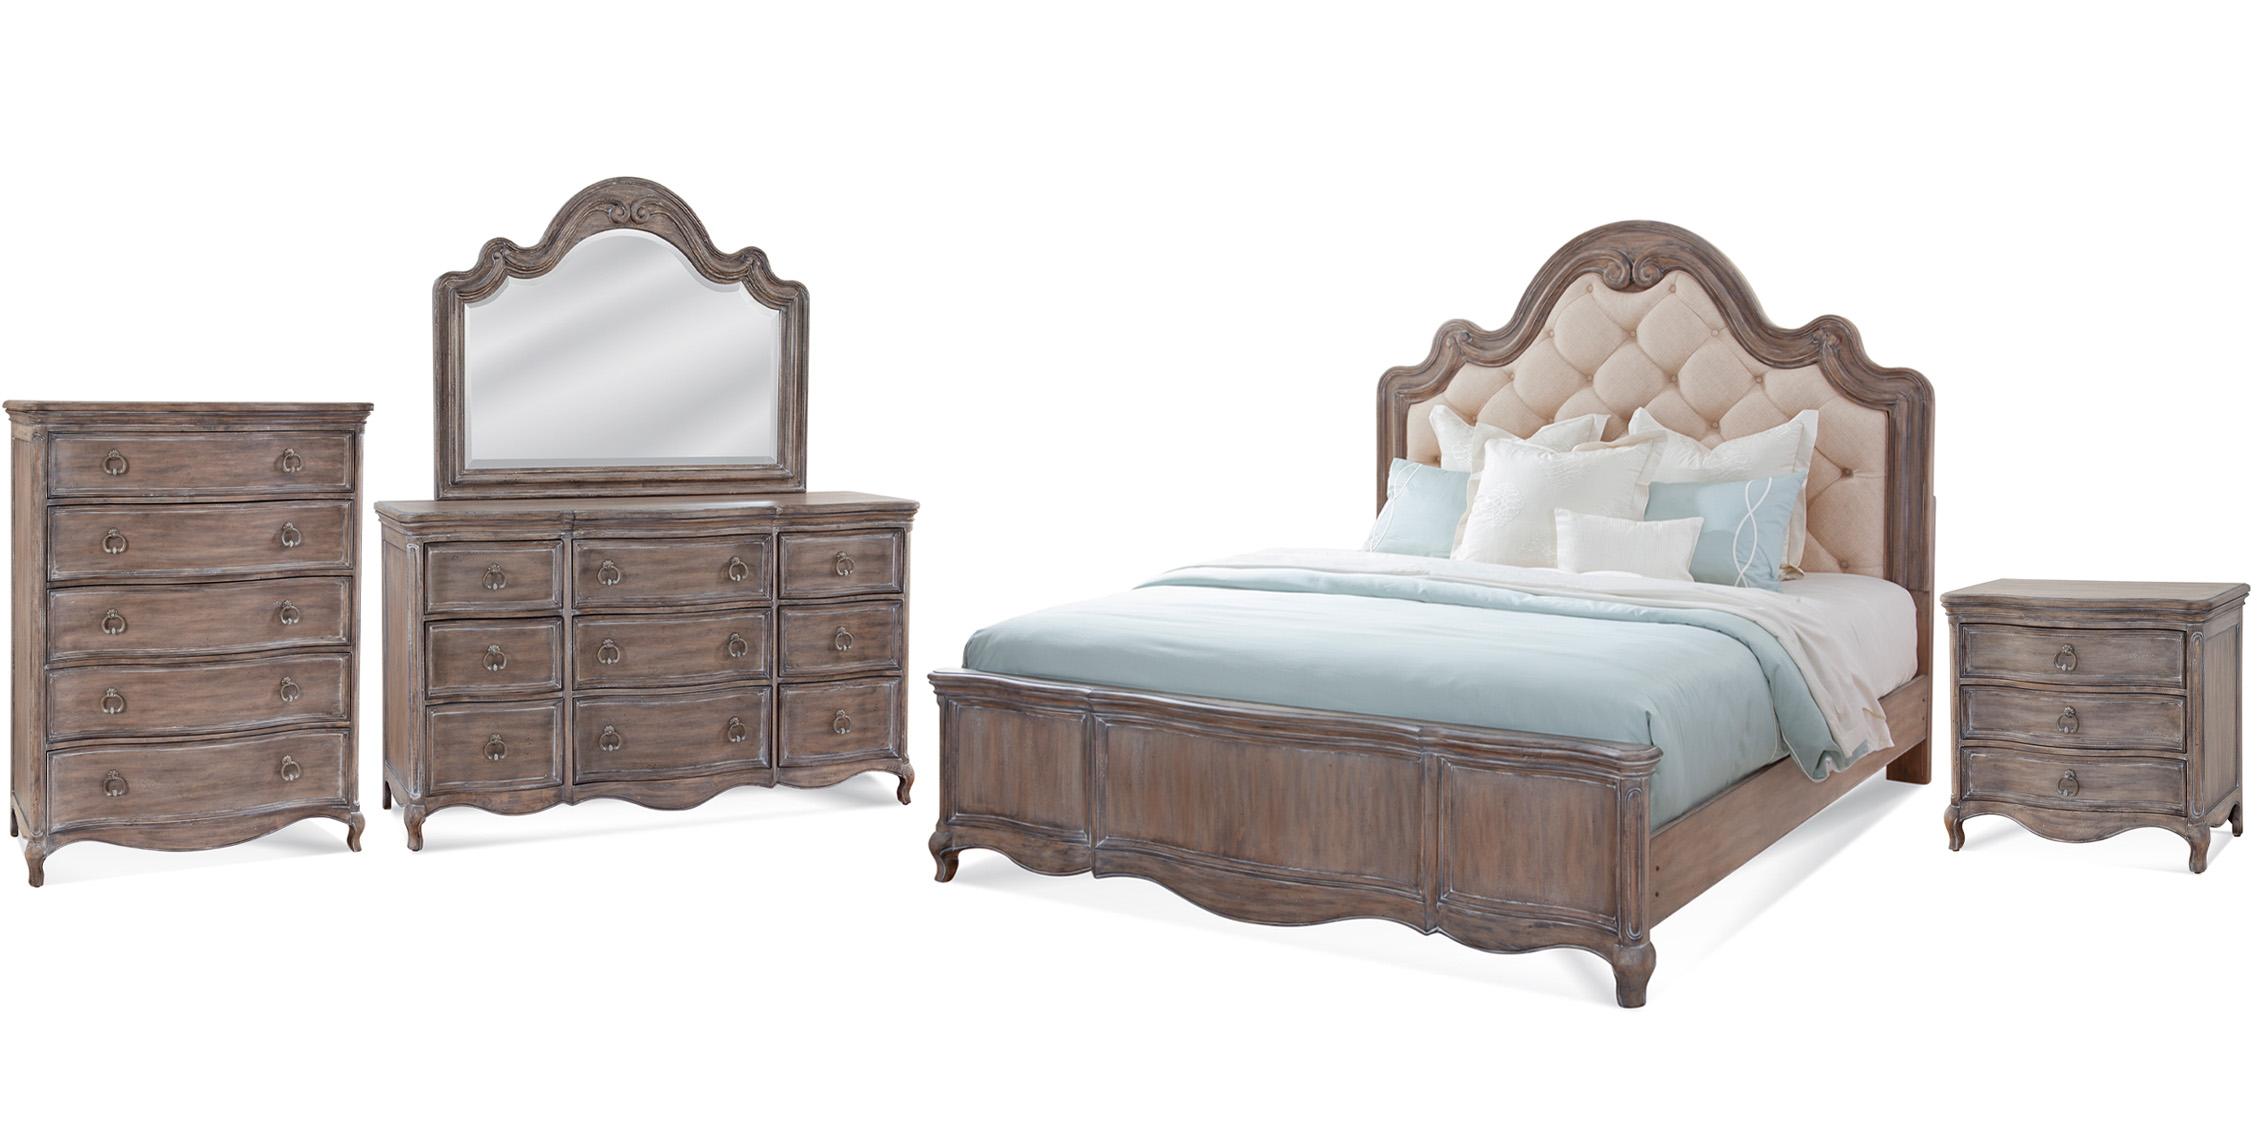 Classic, Traditional Panel Bedroom Set GENOA 1575-50TUPH 1575-QTUPN-5PC in Antique, Gray Fabric